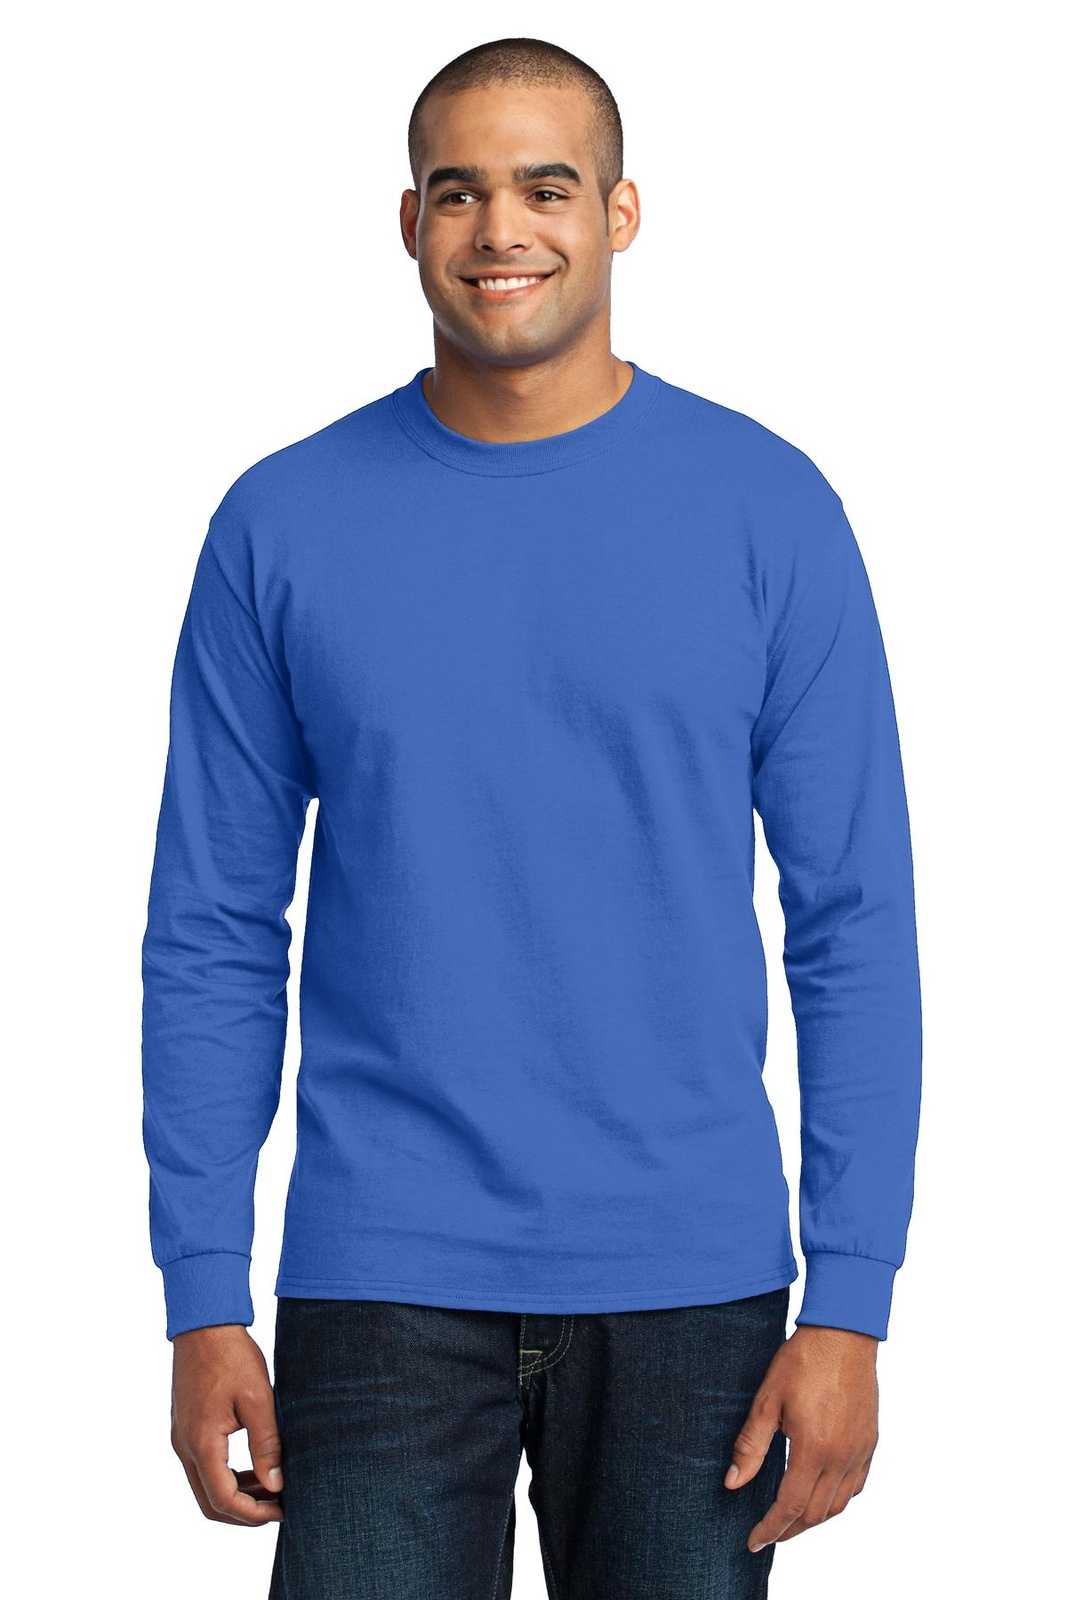 Port & Company PC55LST Tall Long Sleeve Core Blend Tee - Royal - HIT a Double - 1